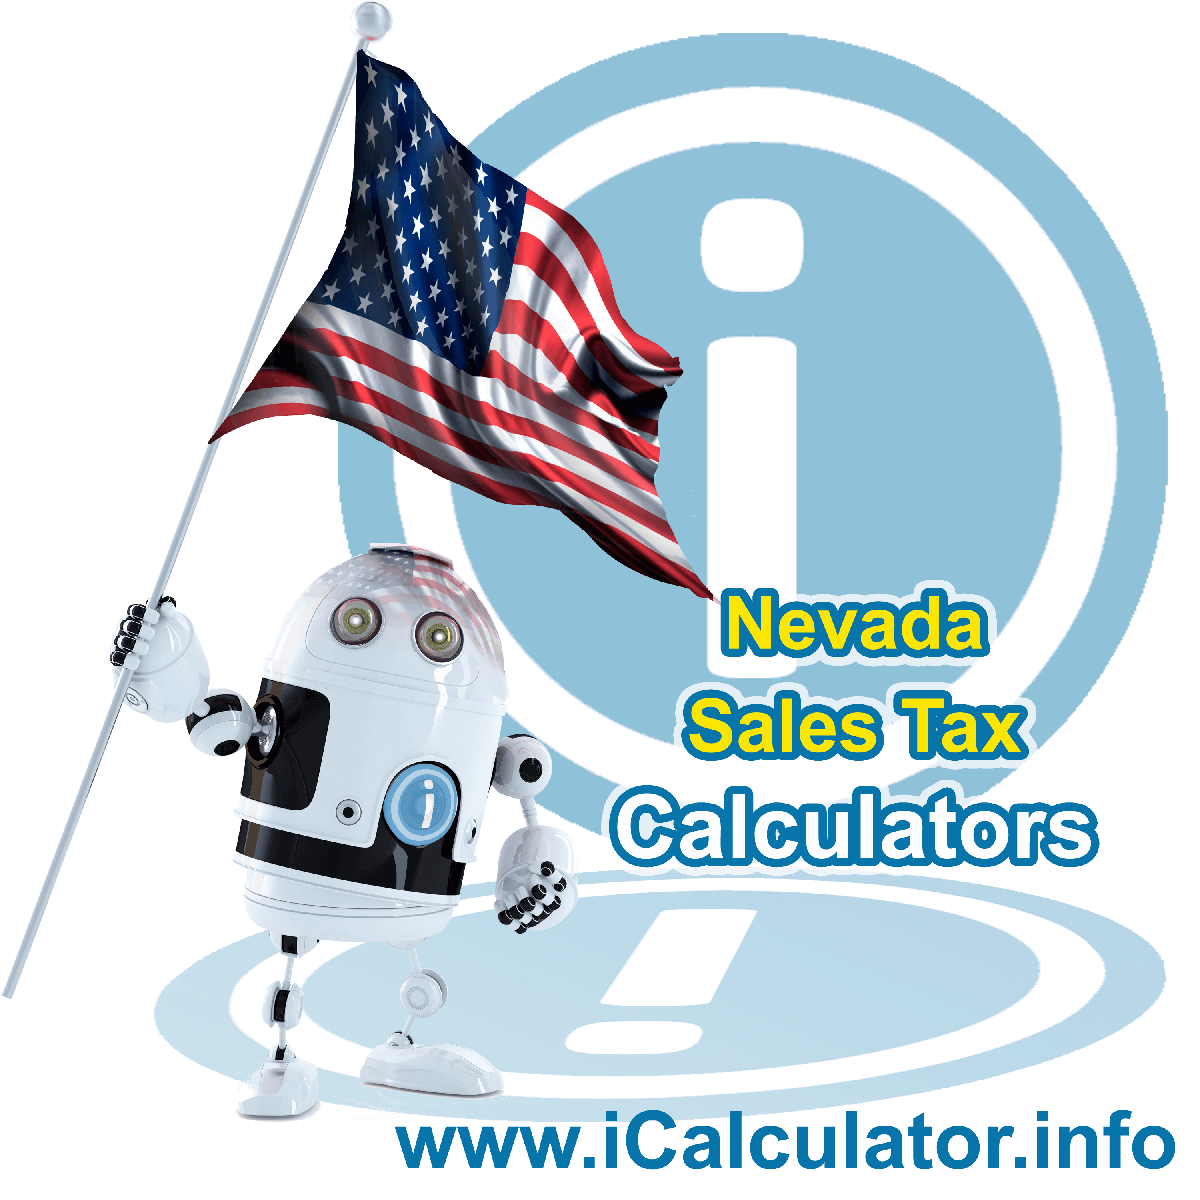 Eureka County Sales Rates: This image illustrates a calculator robot calculating Eureka County sales tax manually using the Eureka County Sales Tax Formula. You can use this information to calculate Eureka County Sales Tax manually or use the Eureka County Sales Tax Calculator to calculate sales tax online.